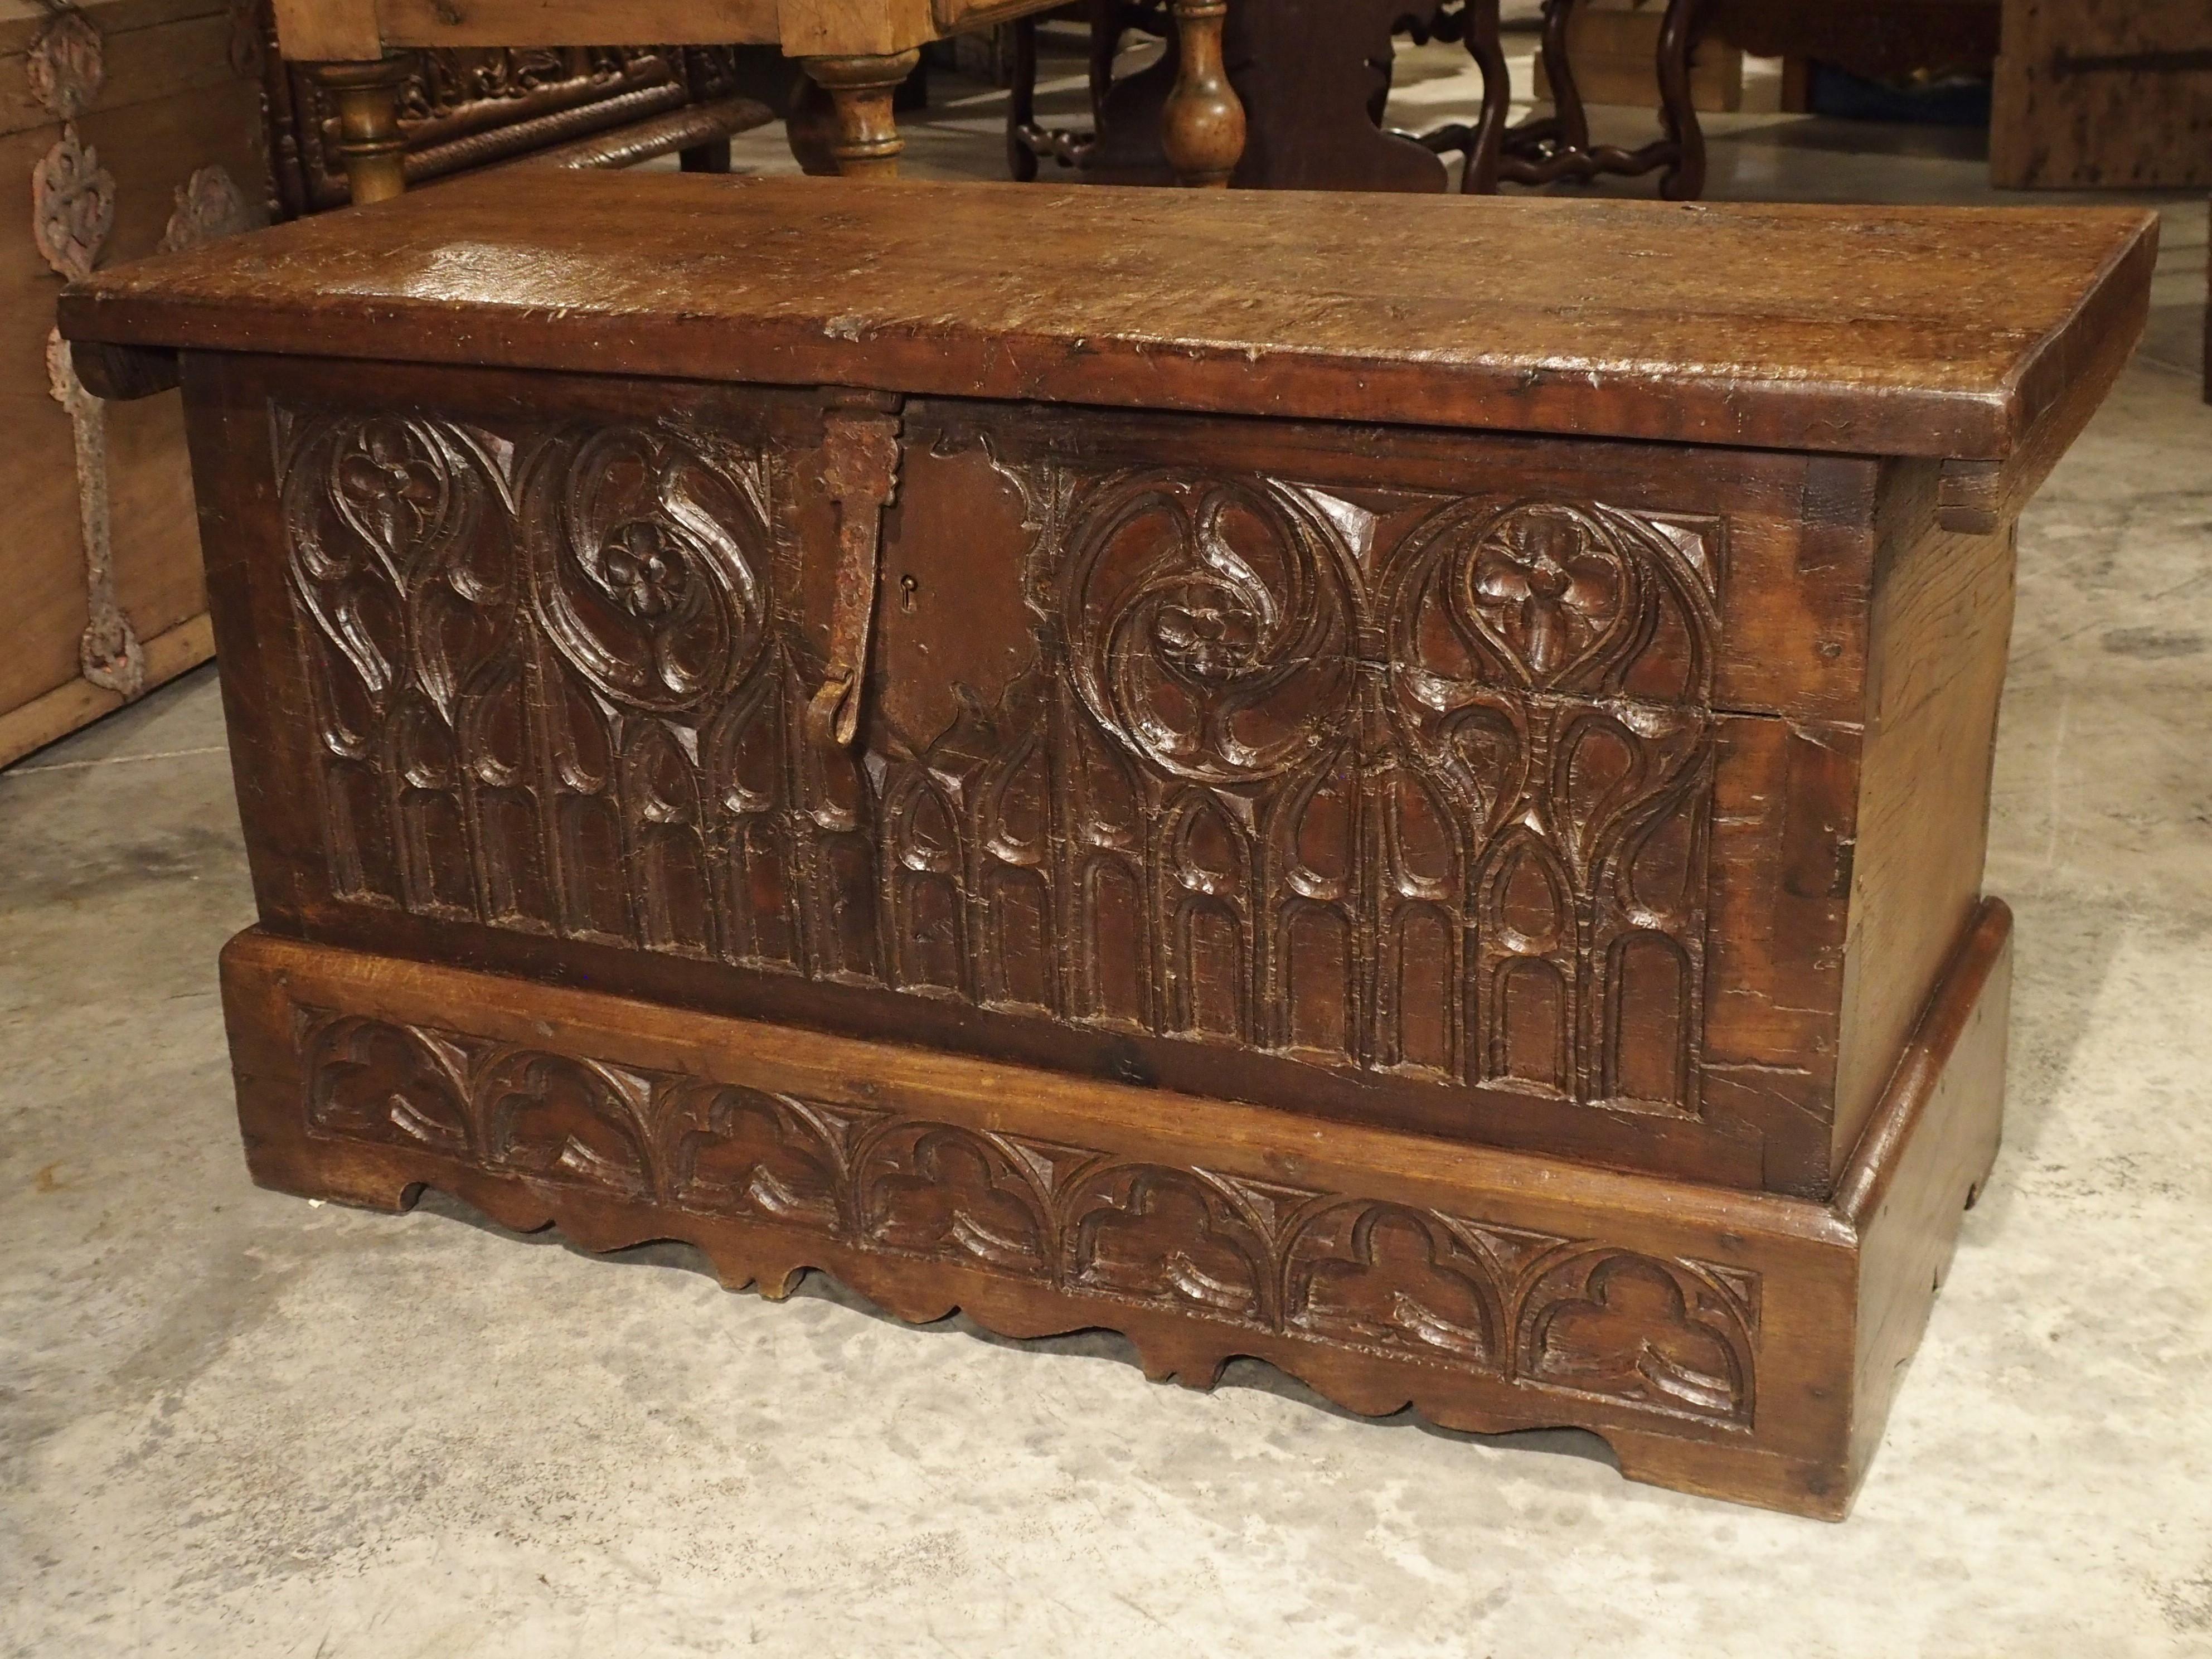 This 17th century French, hand carved oak trunk has wonderful French waxed patina. It has a frontage carved in the Gothic style of ornamentation. The facade is composed of 4 upper circular forms which transition into an arcade spanning the entire